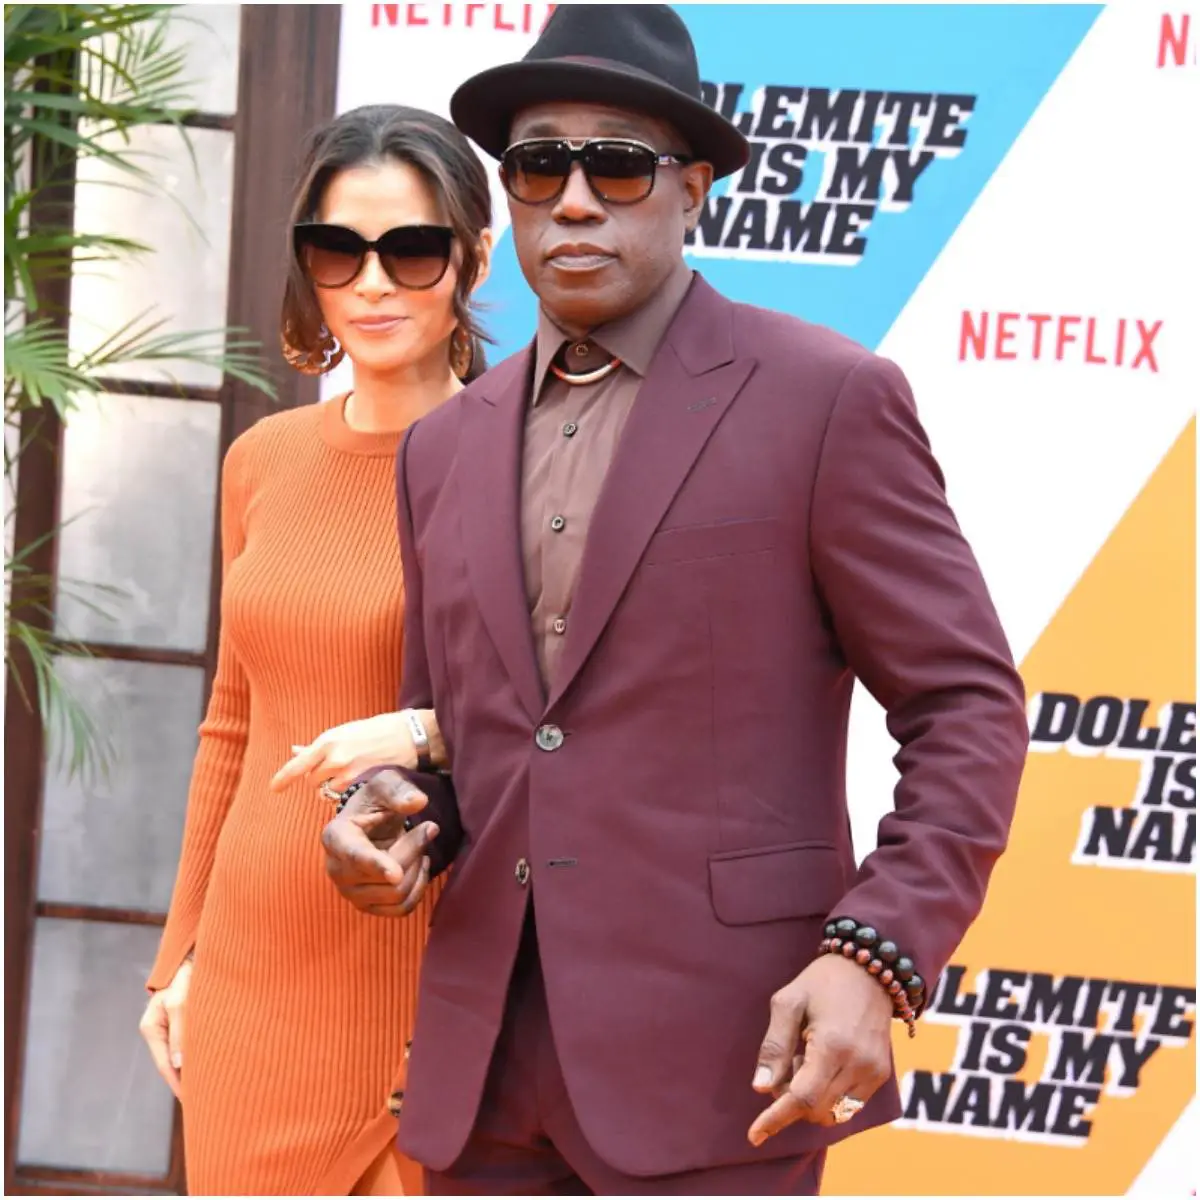 Wesley Snipes and his wife Nakyung Park